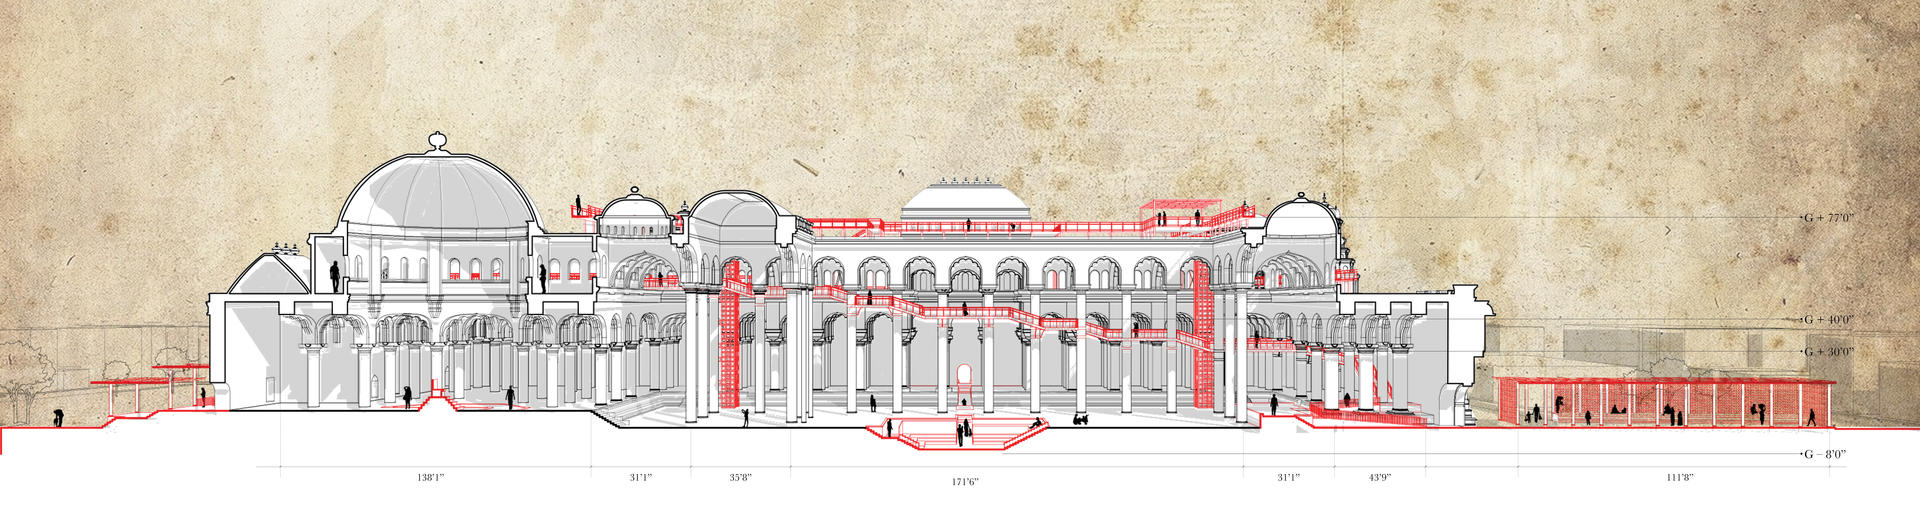 Longitudinal section showing the architectural path and thresholds.